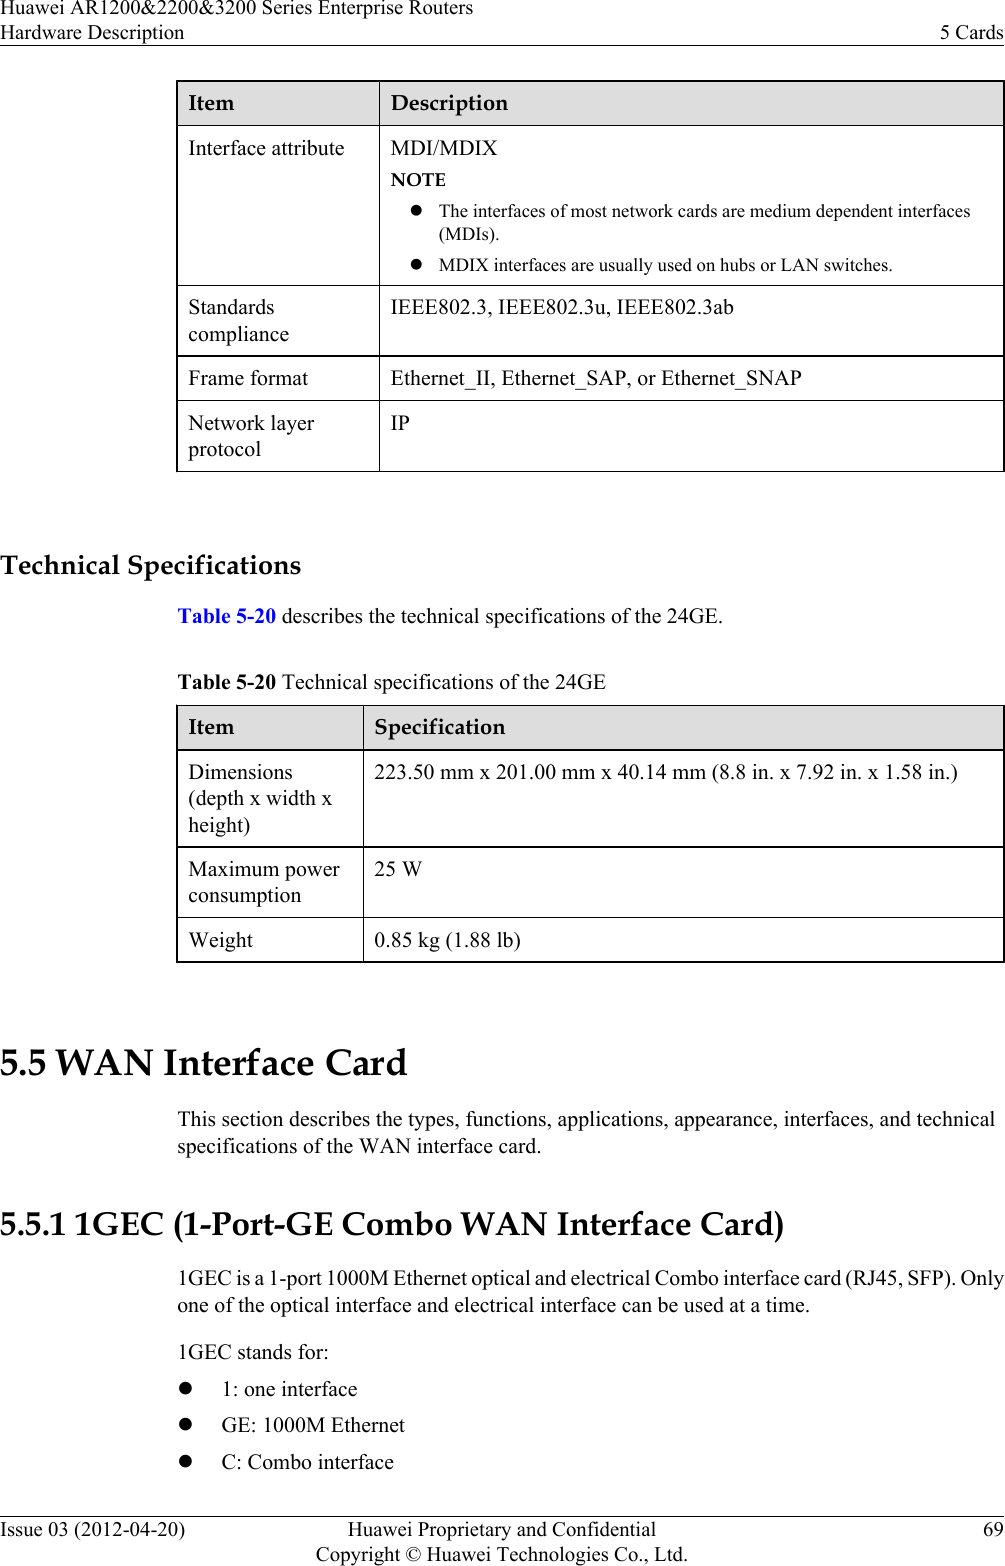 Item DescriptionInterface attribute MDI/MDIXNOTElThe interfaces of most network cards are medium dependent interfaces(MDIs).lMDIX interfaces are usually used on hubs or LAN switches.StandardscomplianceIEEE802.3, IEEE802.3u, IEEE802.3abFrame format Ethernet_II, Ethernet_SAP, or Ethernet_SNAPNetwork layerprotocolIP Technical SpecificationsTable 5-20 describes the technical specifications of the 24GE.Table 5-20 Technical specifications of the 24GEItem SpecificationDimensions(depth x width xheight)223.50 mm x 201.00 mm x 40.14 mm (8.8 in. x 7.92 in. x 1.58 in.)Maximum powerconsumption25 WWeight 0.85 kg (1.88 lb) 5.5 WAN Interface CardThis section describes the types, functions, applications, appearance, interfaces, and technicalspecifications of the WAN interface card.5.5.1 1GEC (1-Port-GE Combo WAN Interface Card)1GEC is a 1-port 1000M Ethernet optical and electrical Combo interface card (RJ45, SFP). Onlyone of the optical interface and electrical interface can be used at a time.1GEC stands for:l1: one interfacelGE: 1000M EthernetlC: Combo interfaceHuawei AR1200&amp;2200&amp;3200 Series Enterprise RoutersHardware Description 5 CardsIssue 03 (2012-04-20) Huawei Proprietary and ConfidentialCopyright © Huawei Technologies Co., Ltd.69